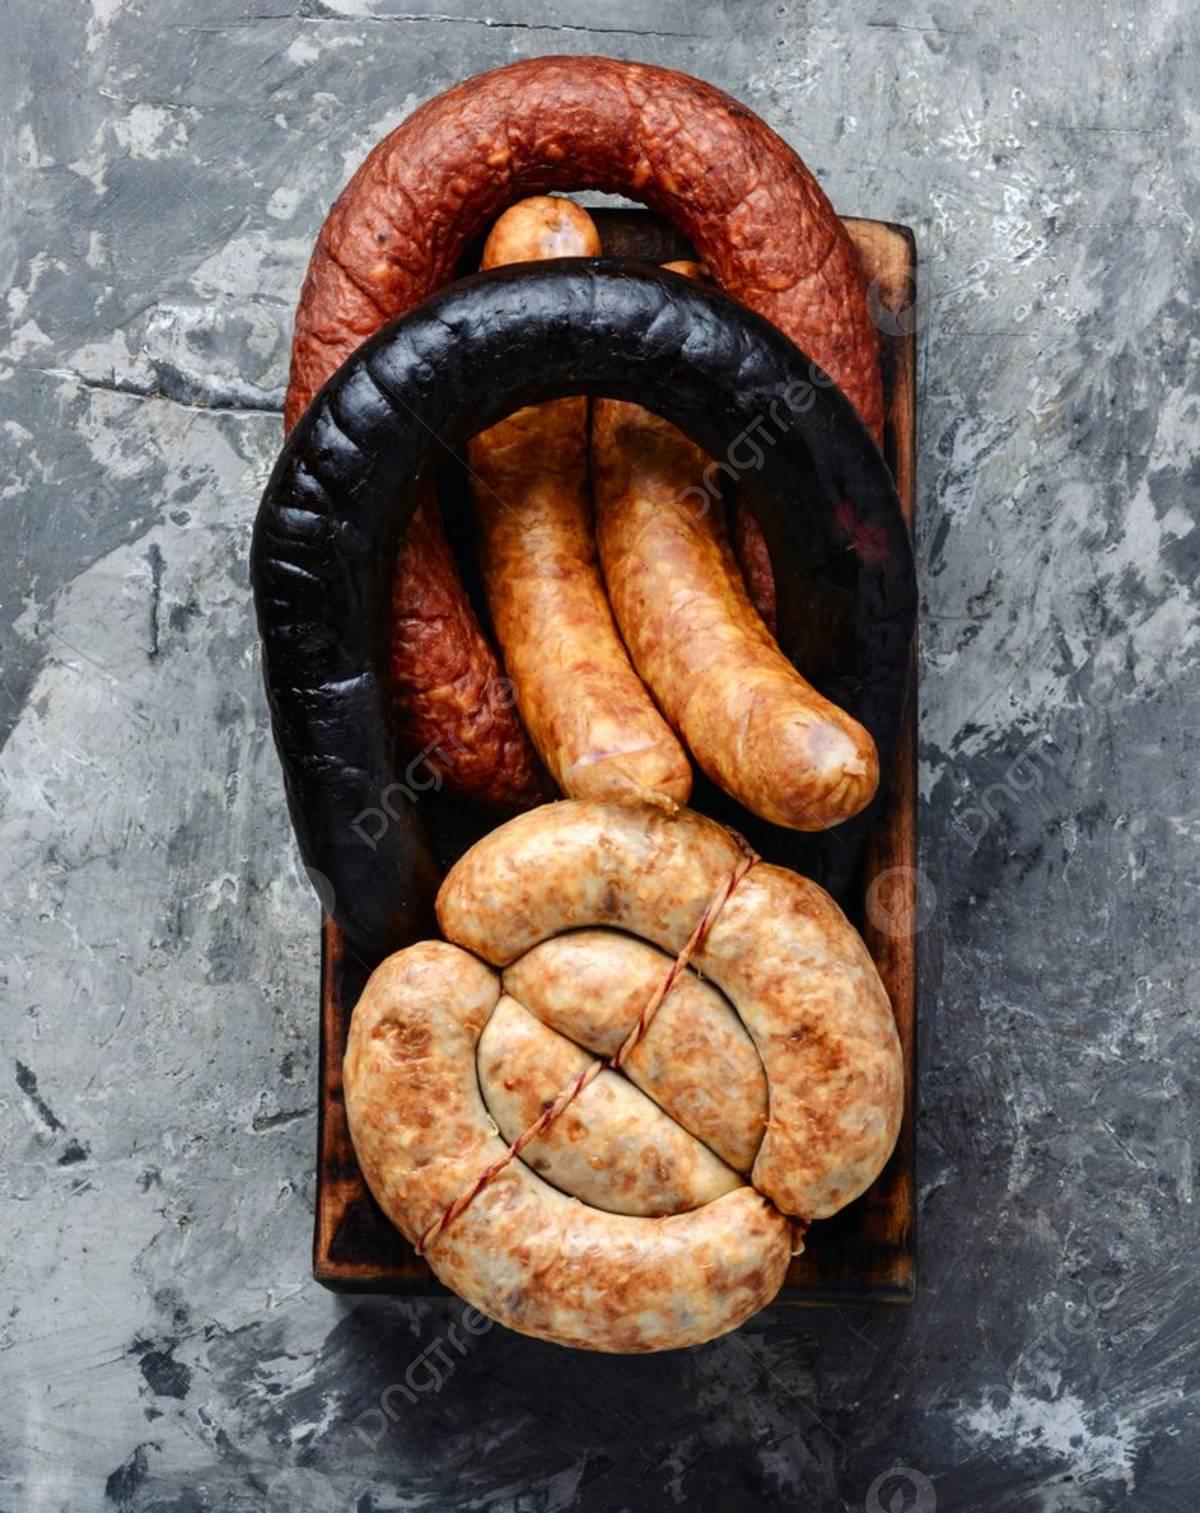  Bratwurst Hintergrundbild 1200x1513. Set Of Smoked Meats And Sausages Home Style Sausagesdelicious Salami Smoked Sausages On Cutting Board Photo Background And Picture For Free Download